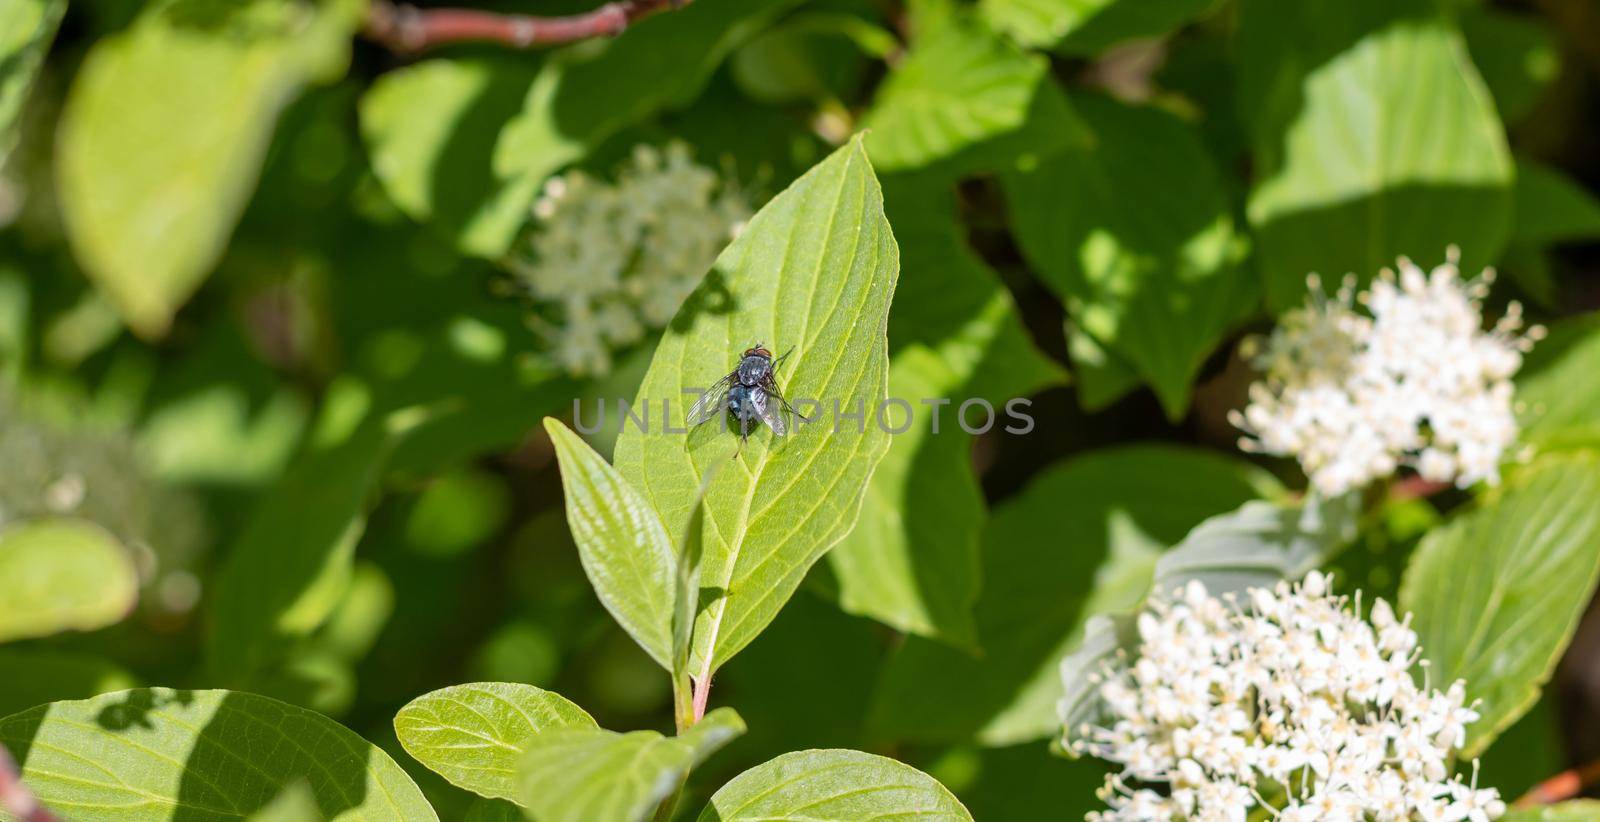 An ordinary blue fly sits on a green leaf close-up.